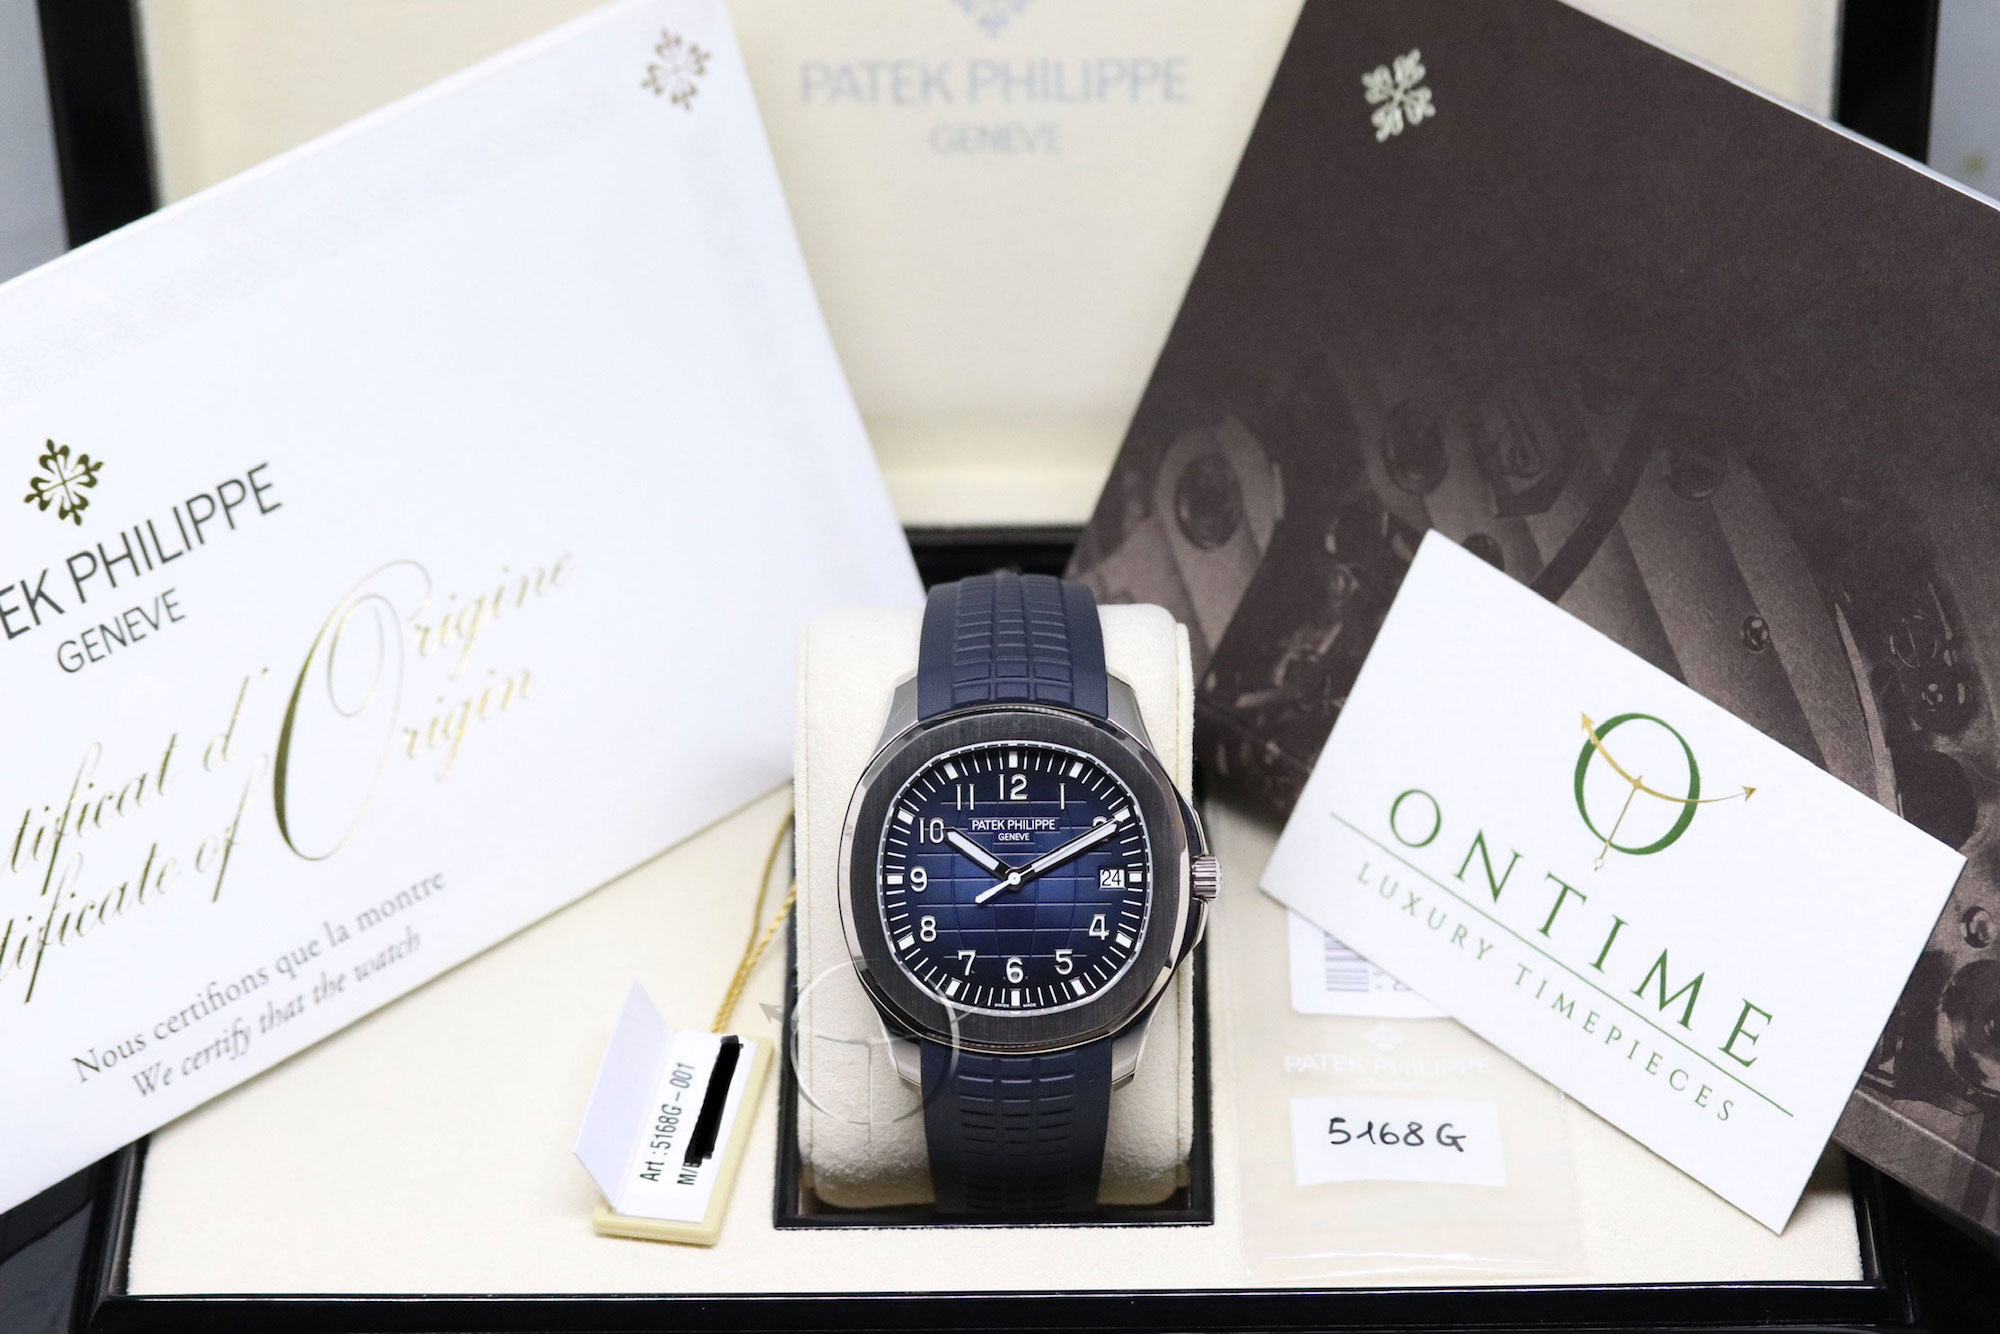 Patek Philippe 5168G-001 Aquanaut Blue Dial 42mm White Gold Watch Box and  Papers